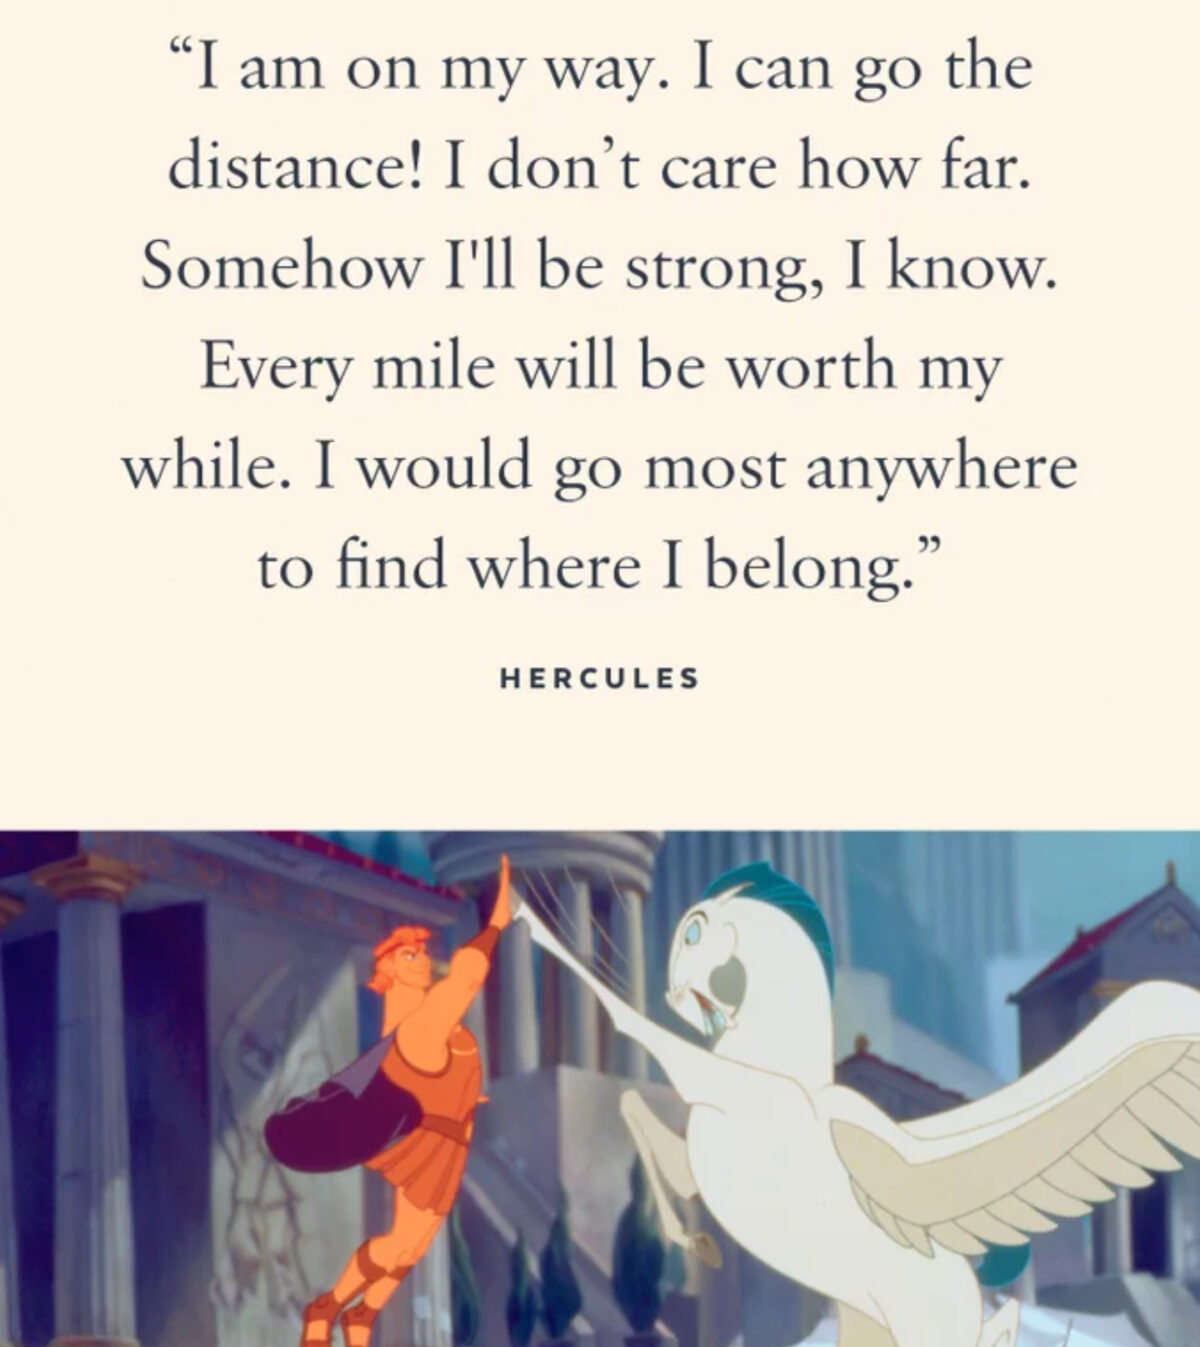 Hercules quote - The Best Disney Memes On The Internet